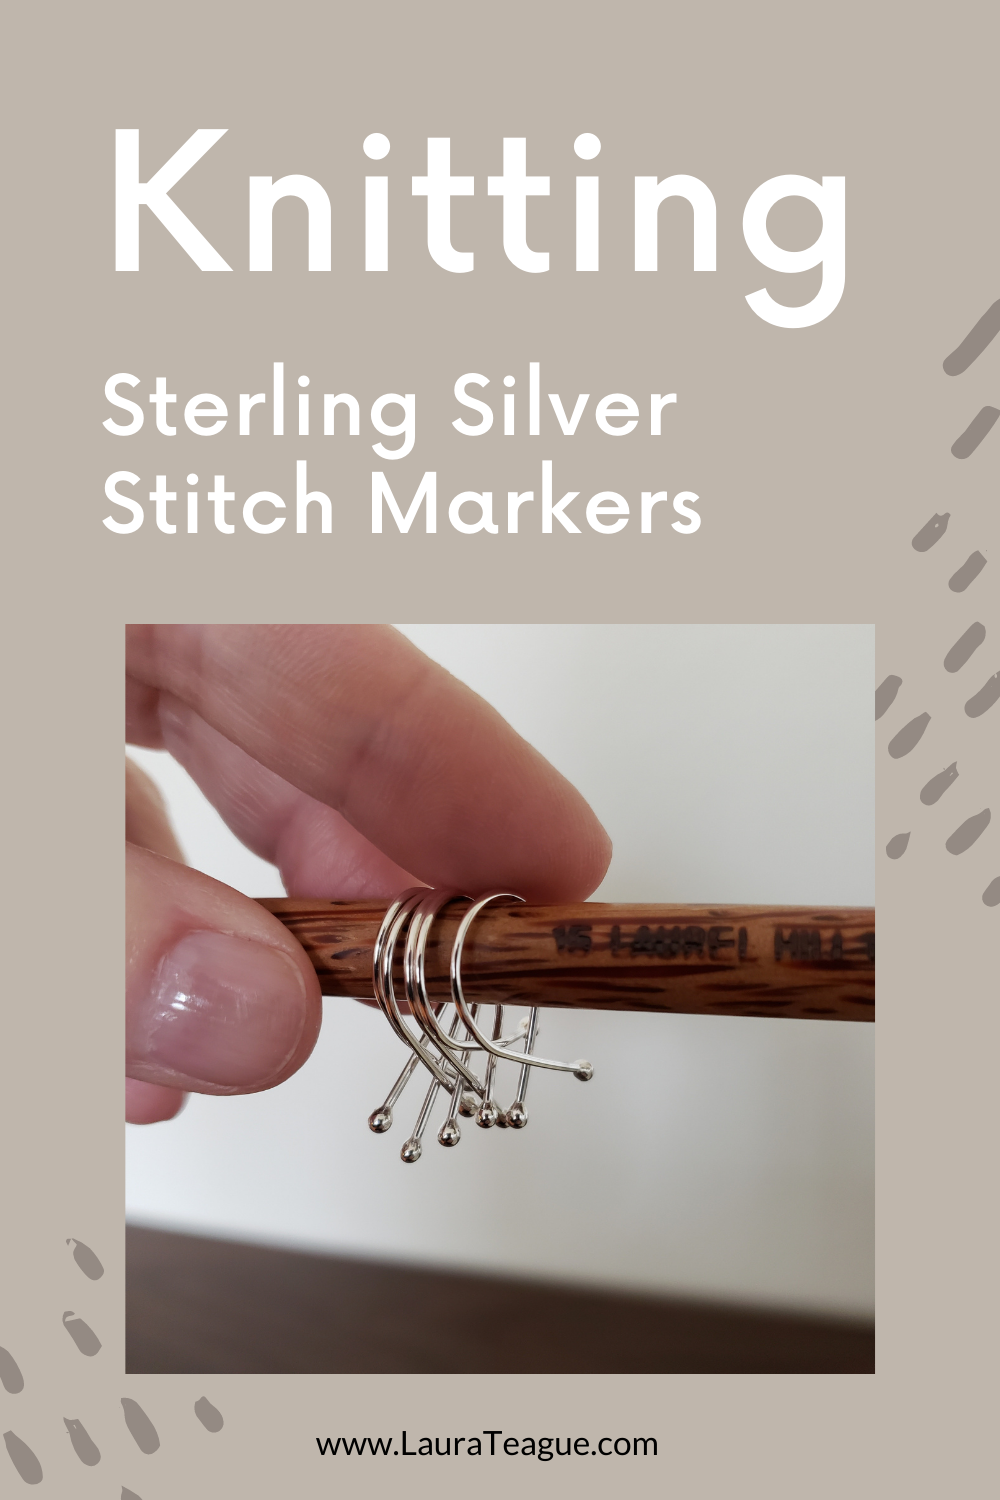 Large sterling silver stitch markers for knitting